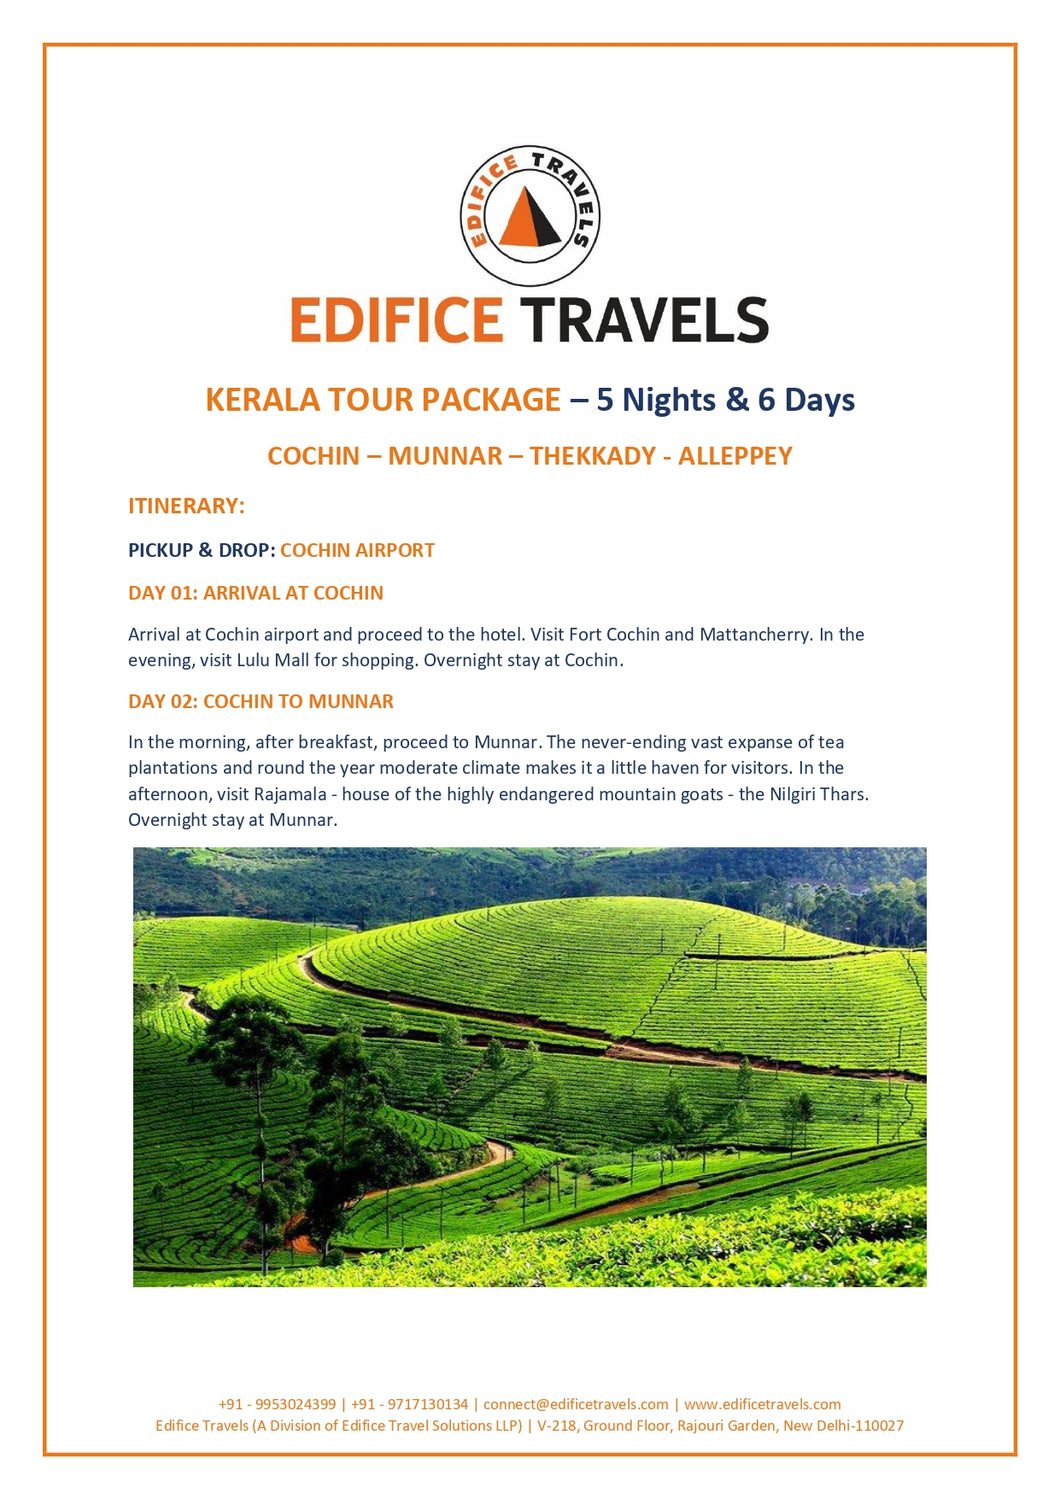 Kerala Tour Package - 5 Nights & 6 Days - 4 Star Hotel Category